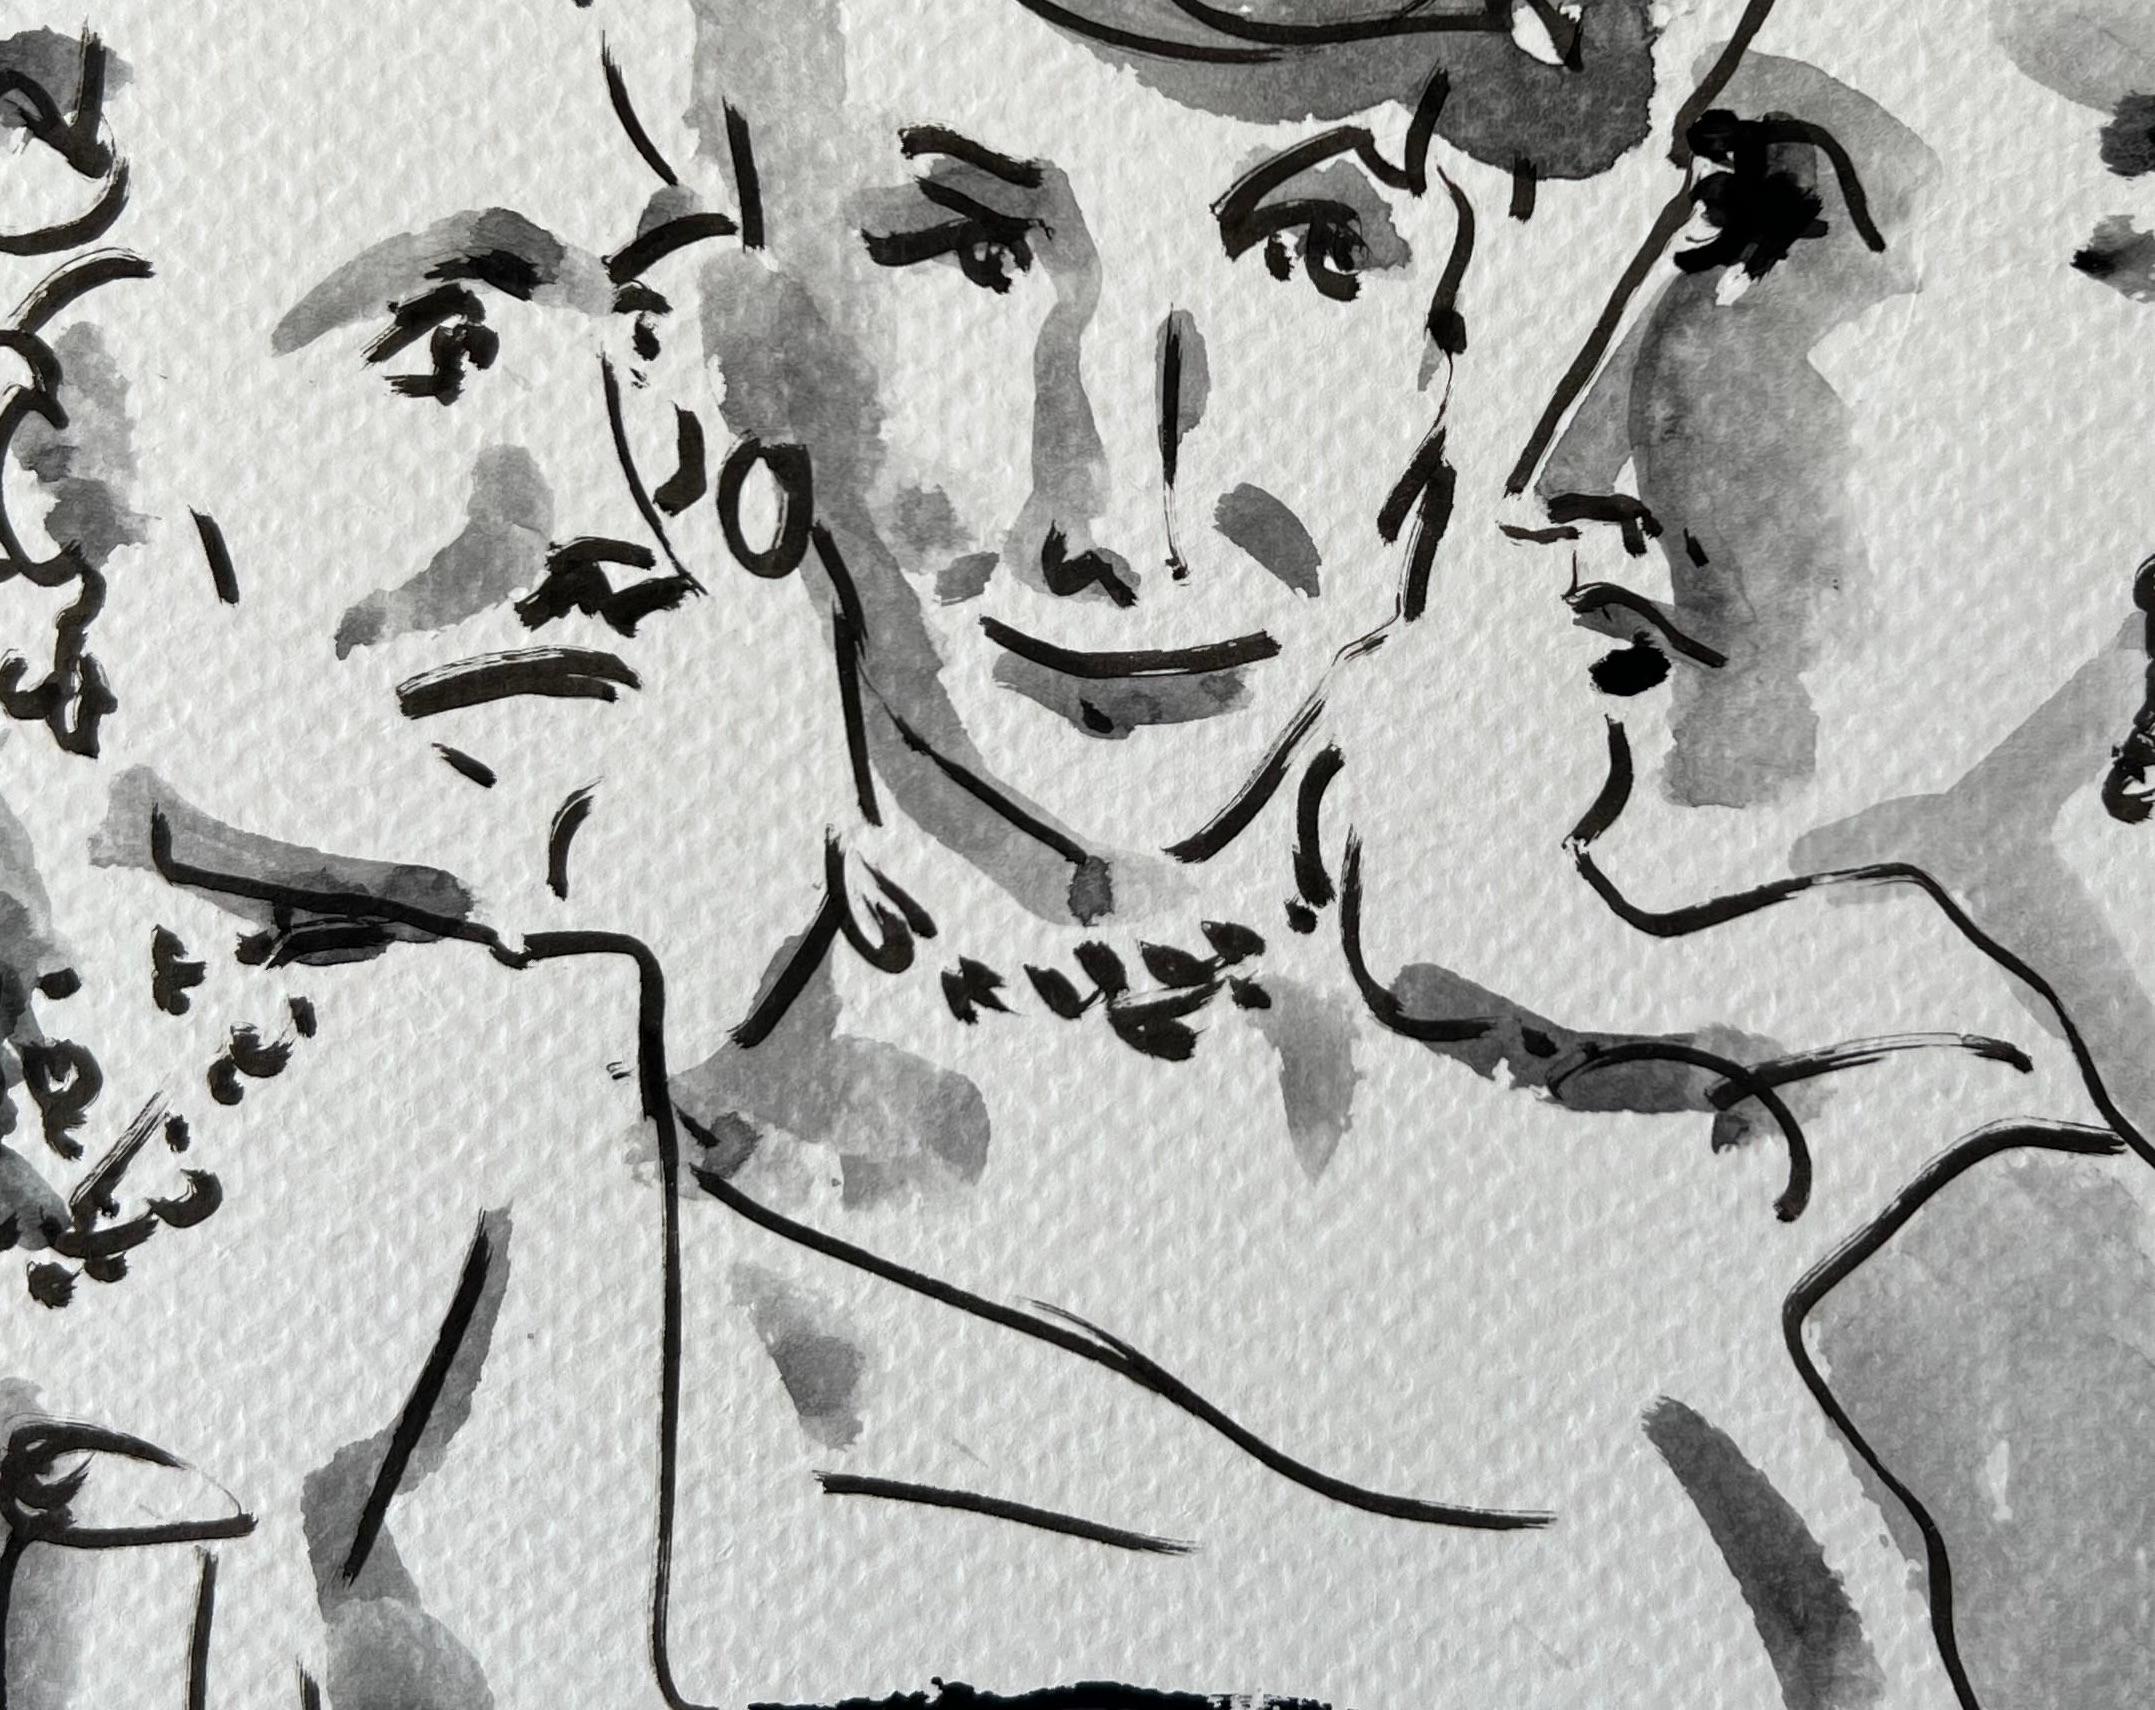 Nan Kempner, Fran Stark and Jacqueline de Ribes photographed by Roxane Lowit (20 - Art by Manuel Santelices